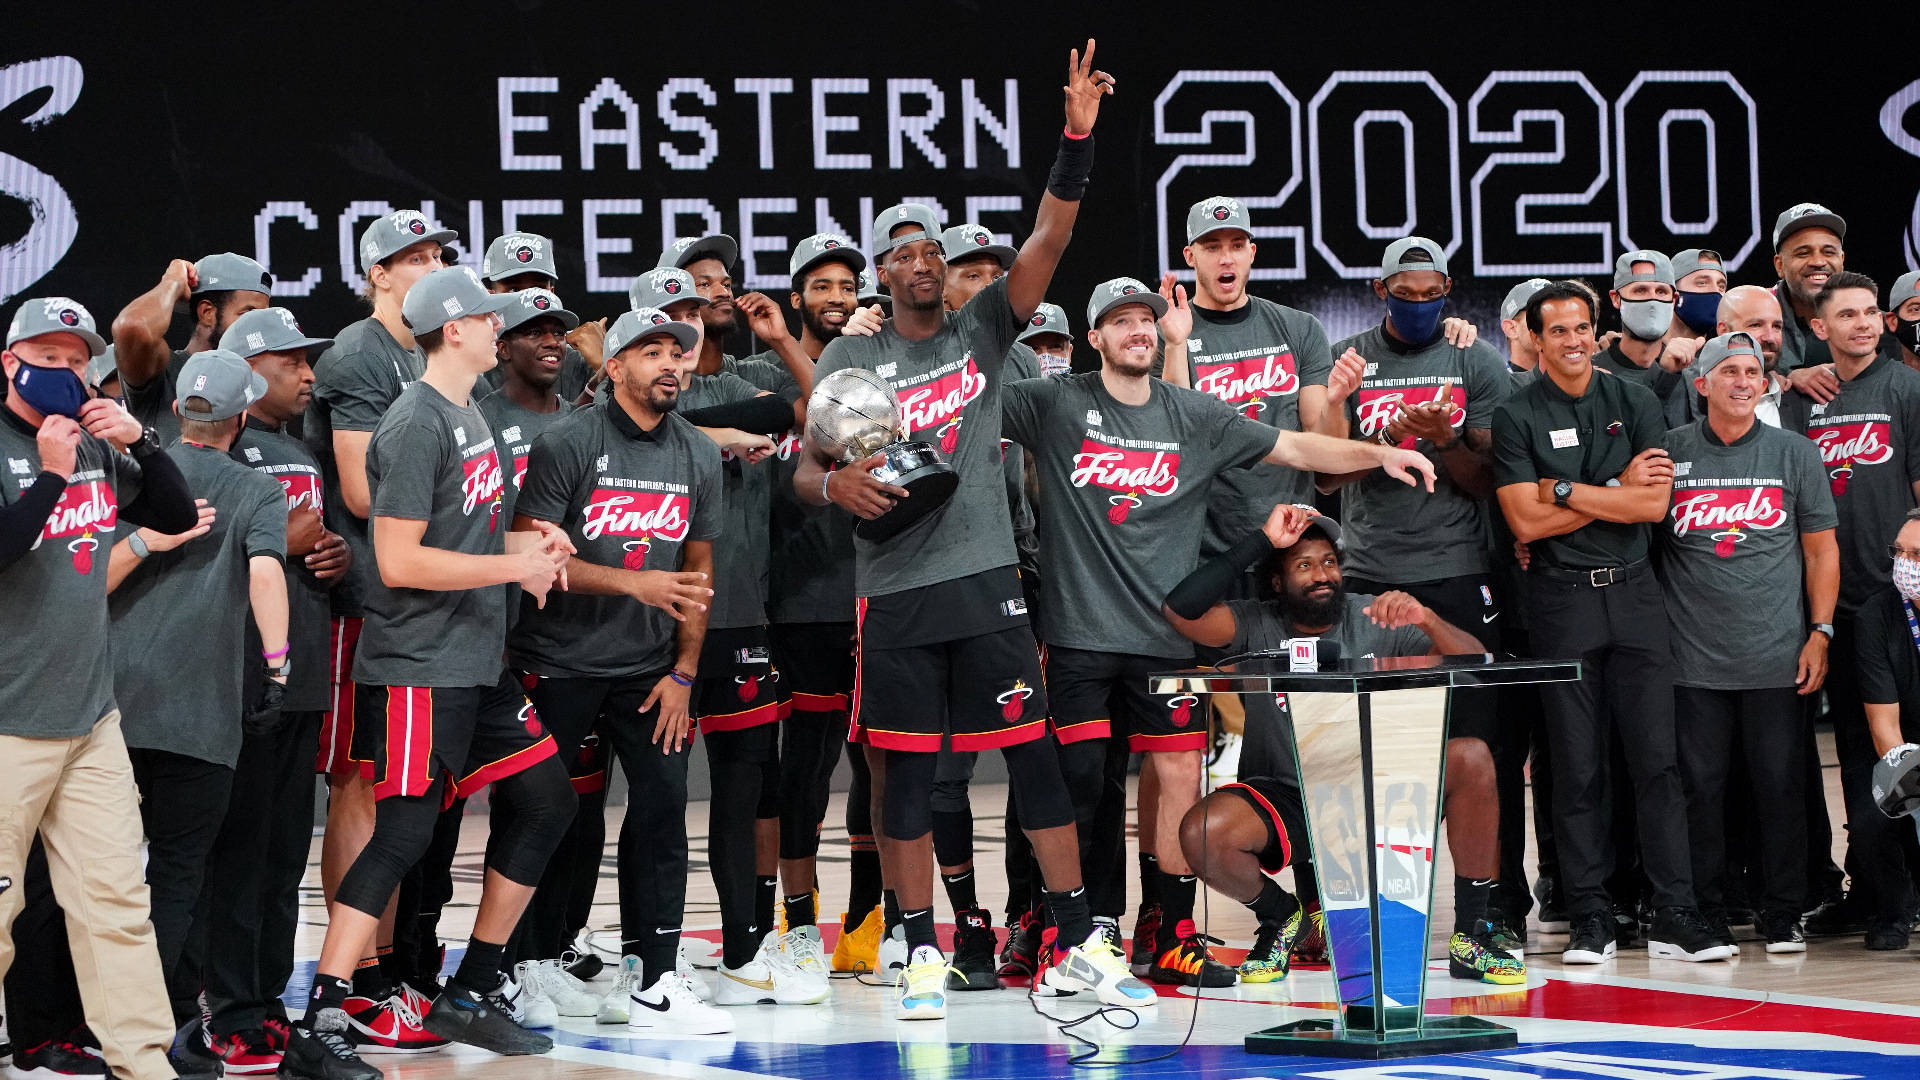 Miami Heat Eastern Conference Champion Background